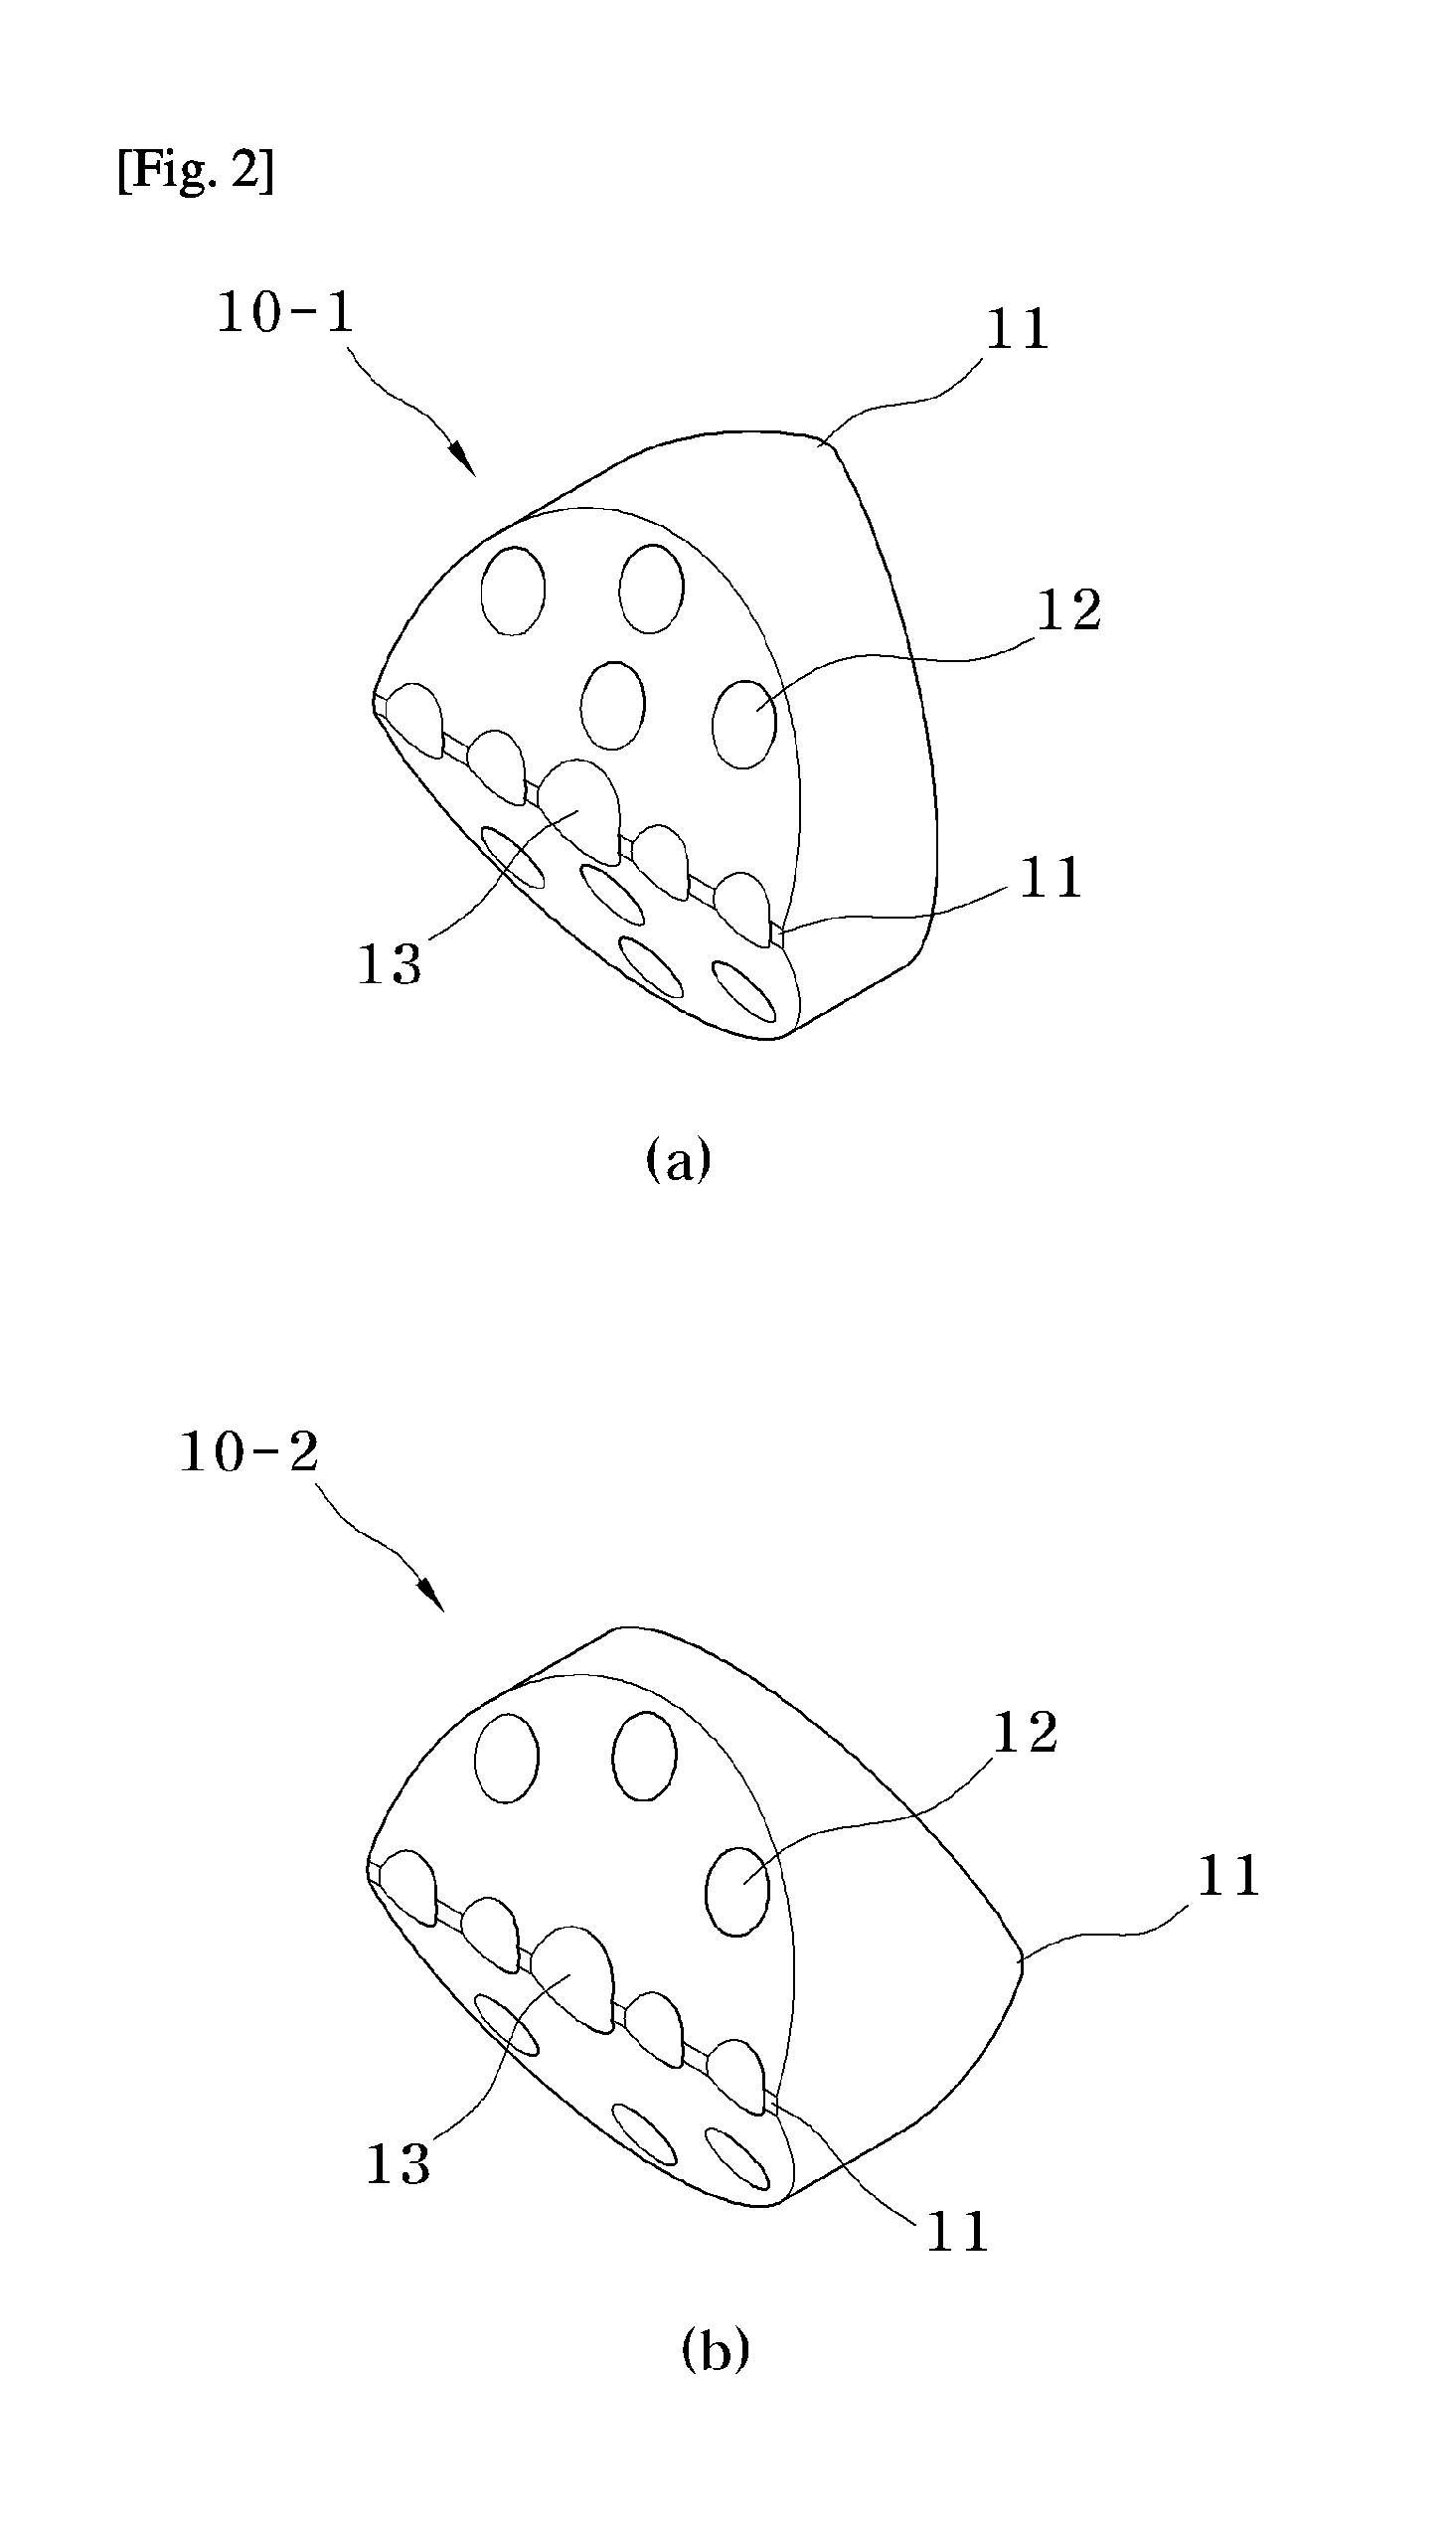 Articulation for surgical equipment using ball joint